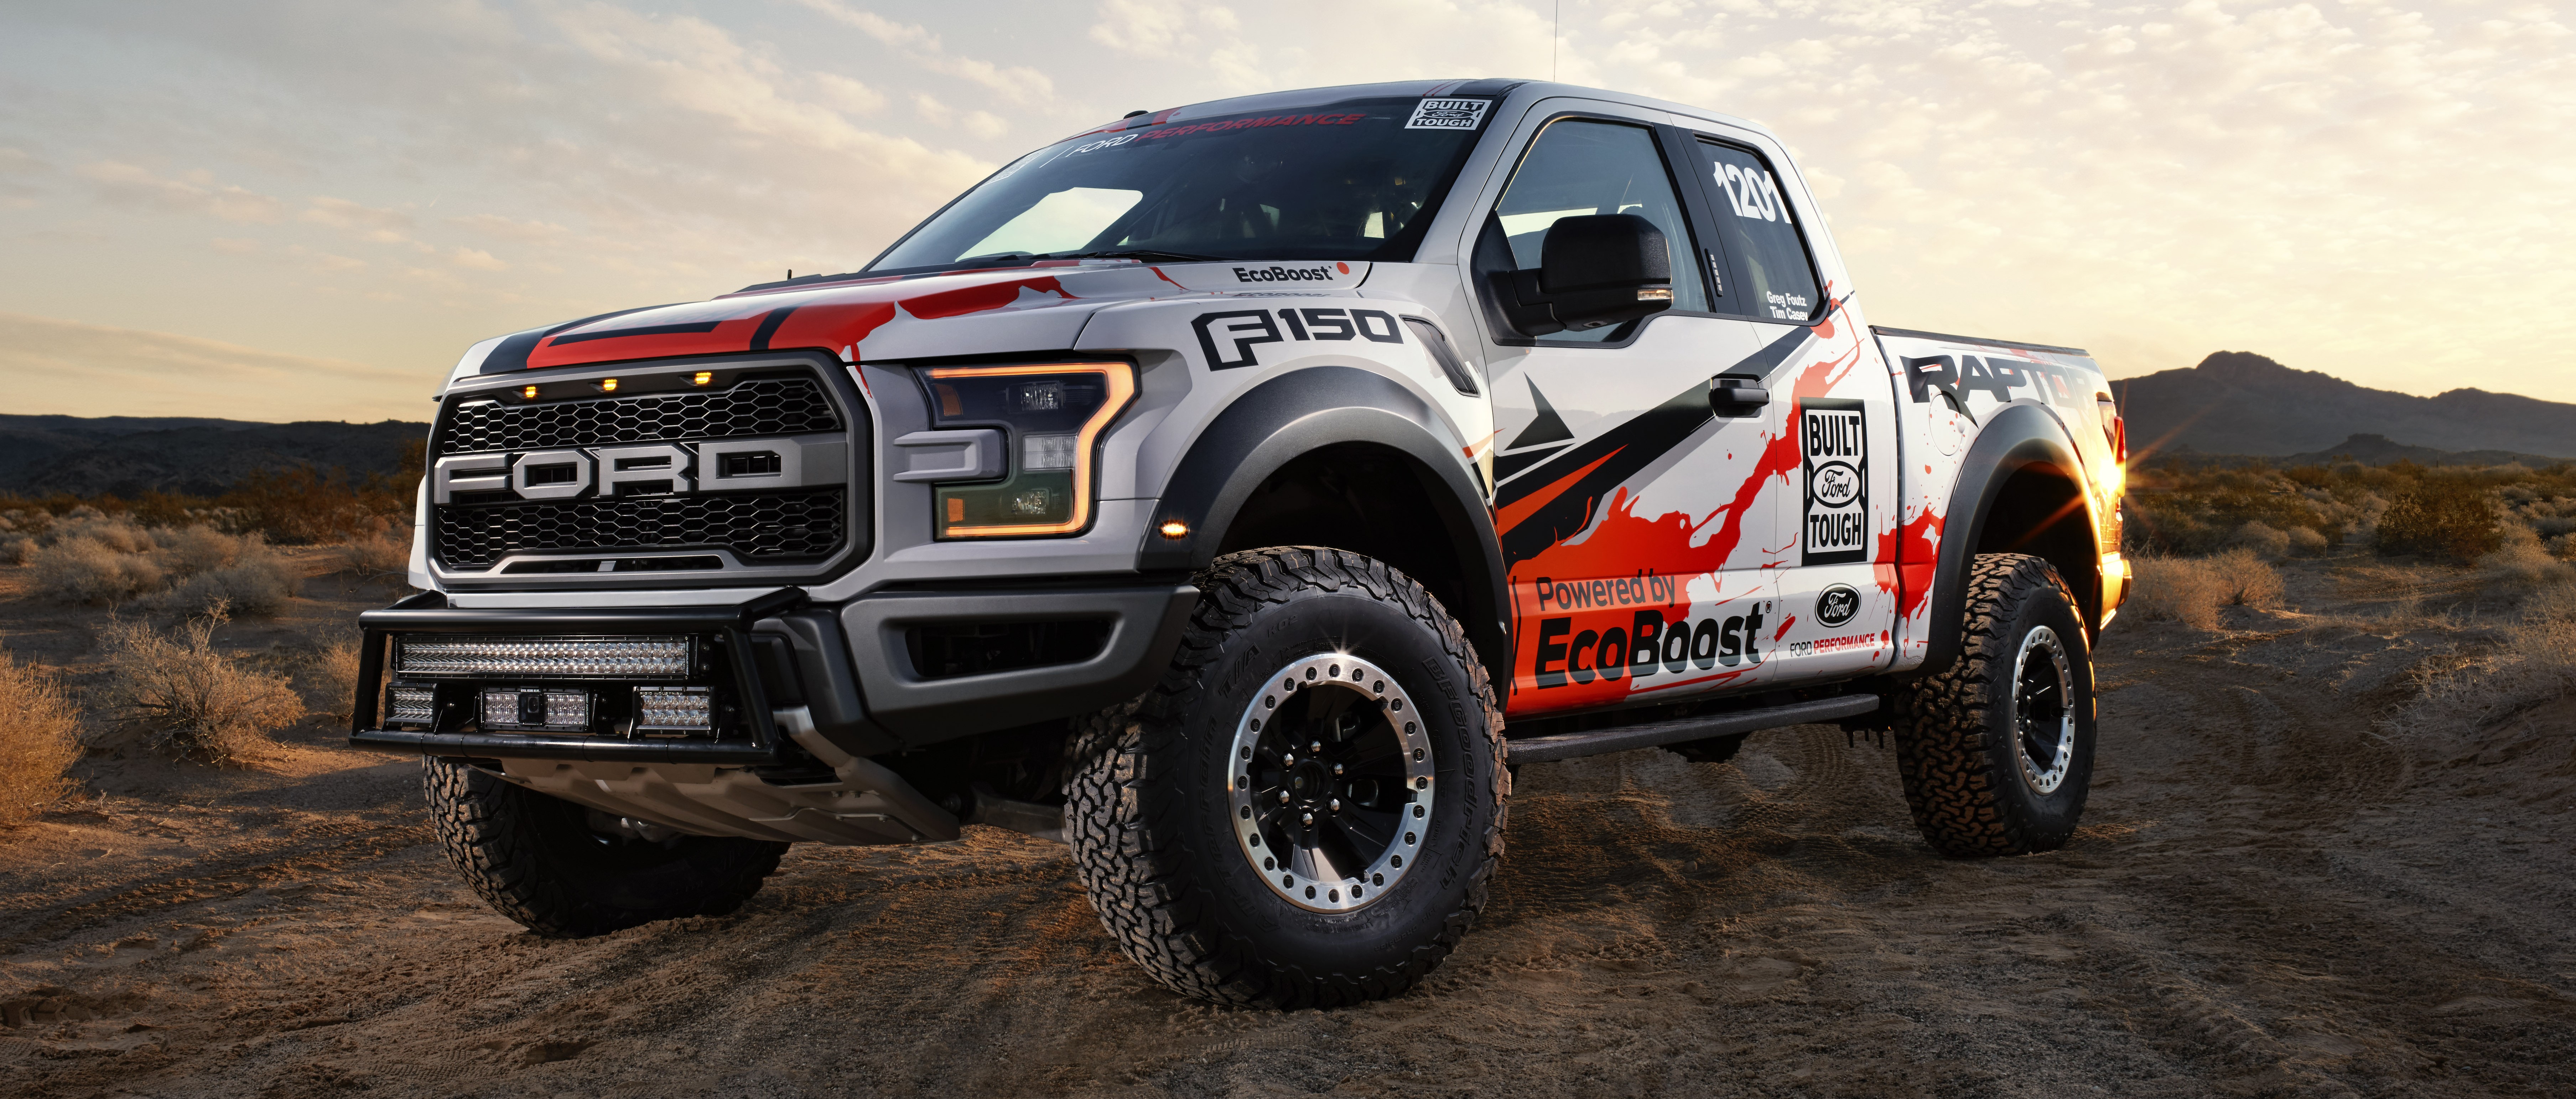 ford raptor wallpaper,land vehicle,vehicle,car,off road racing,automotive tire